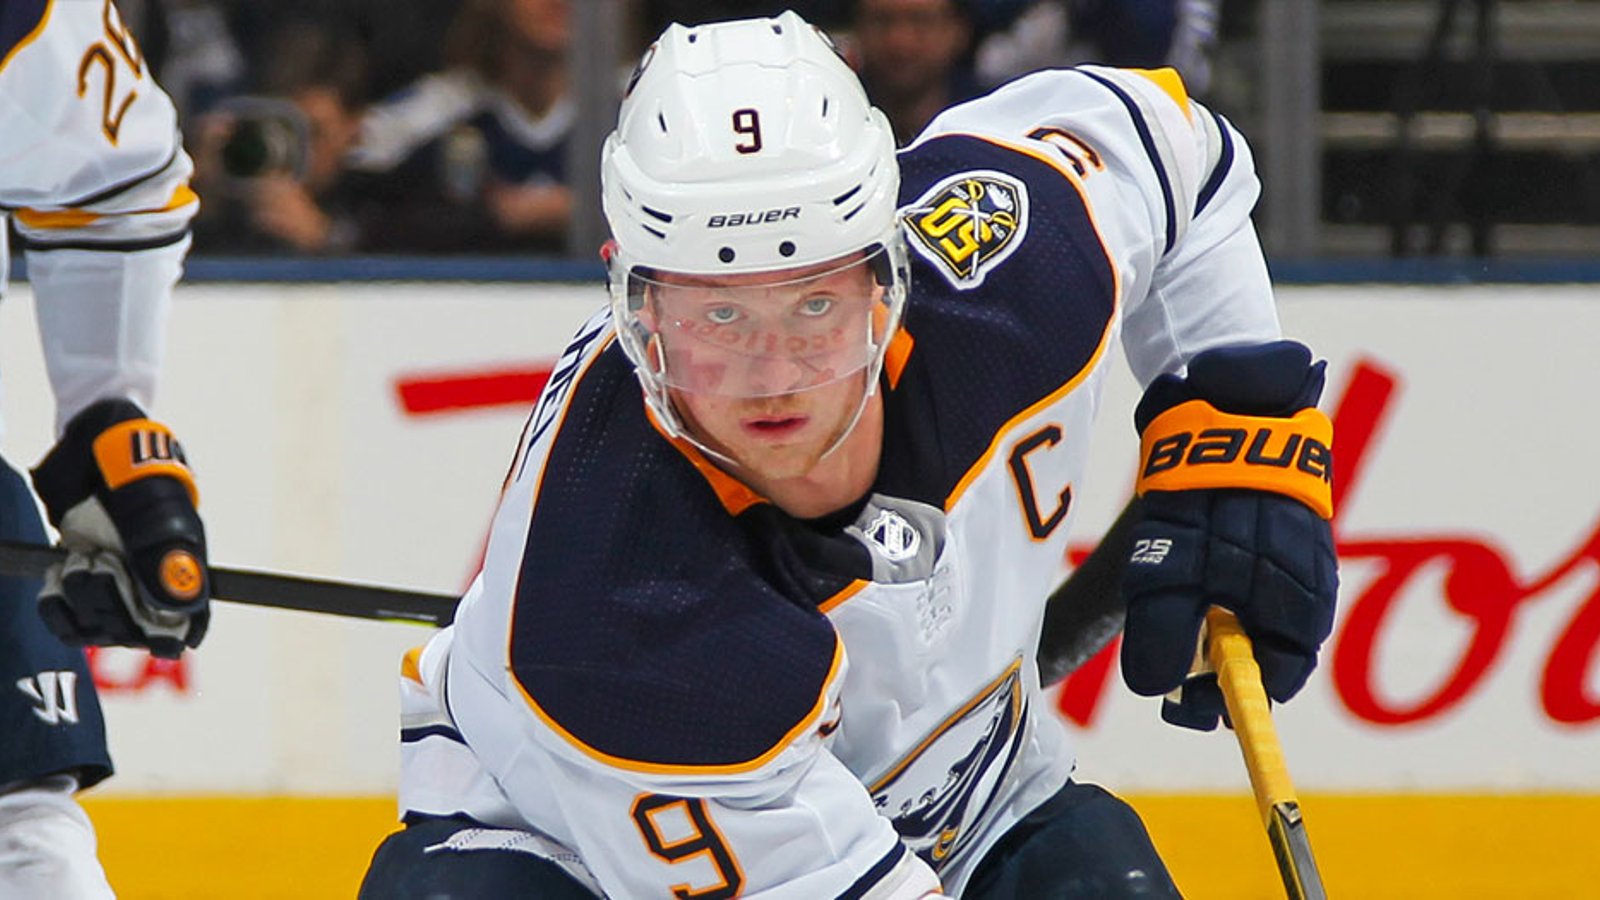 Report: A new suitor enters Eichel trade negotiations